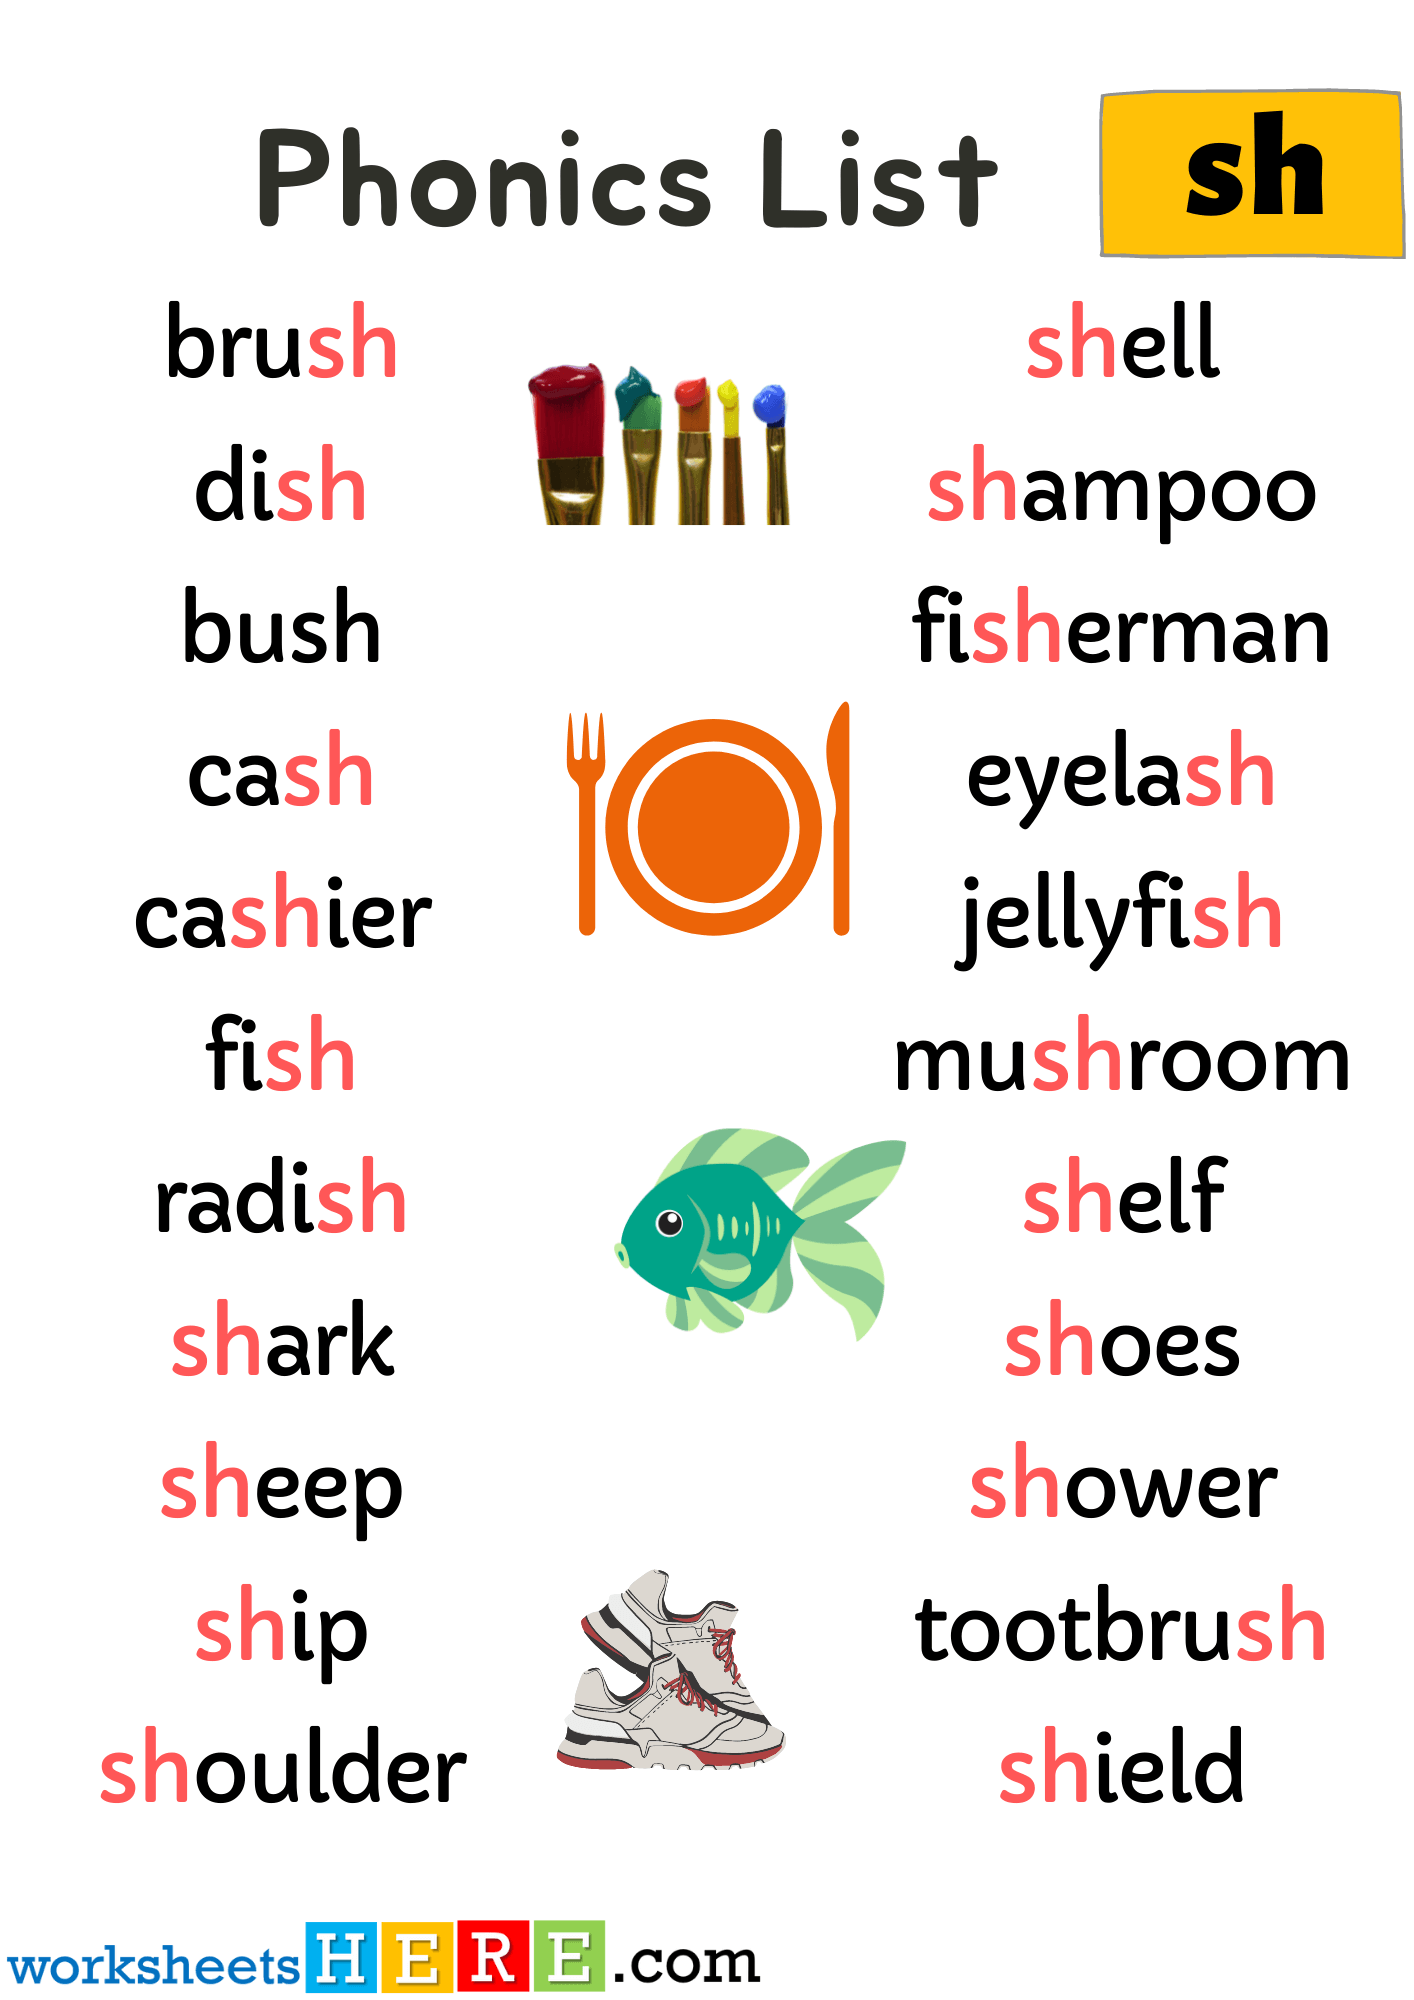 Spelling Phonics ‘sh’ Sounds PDF Worksheet For Kids and Students